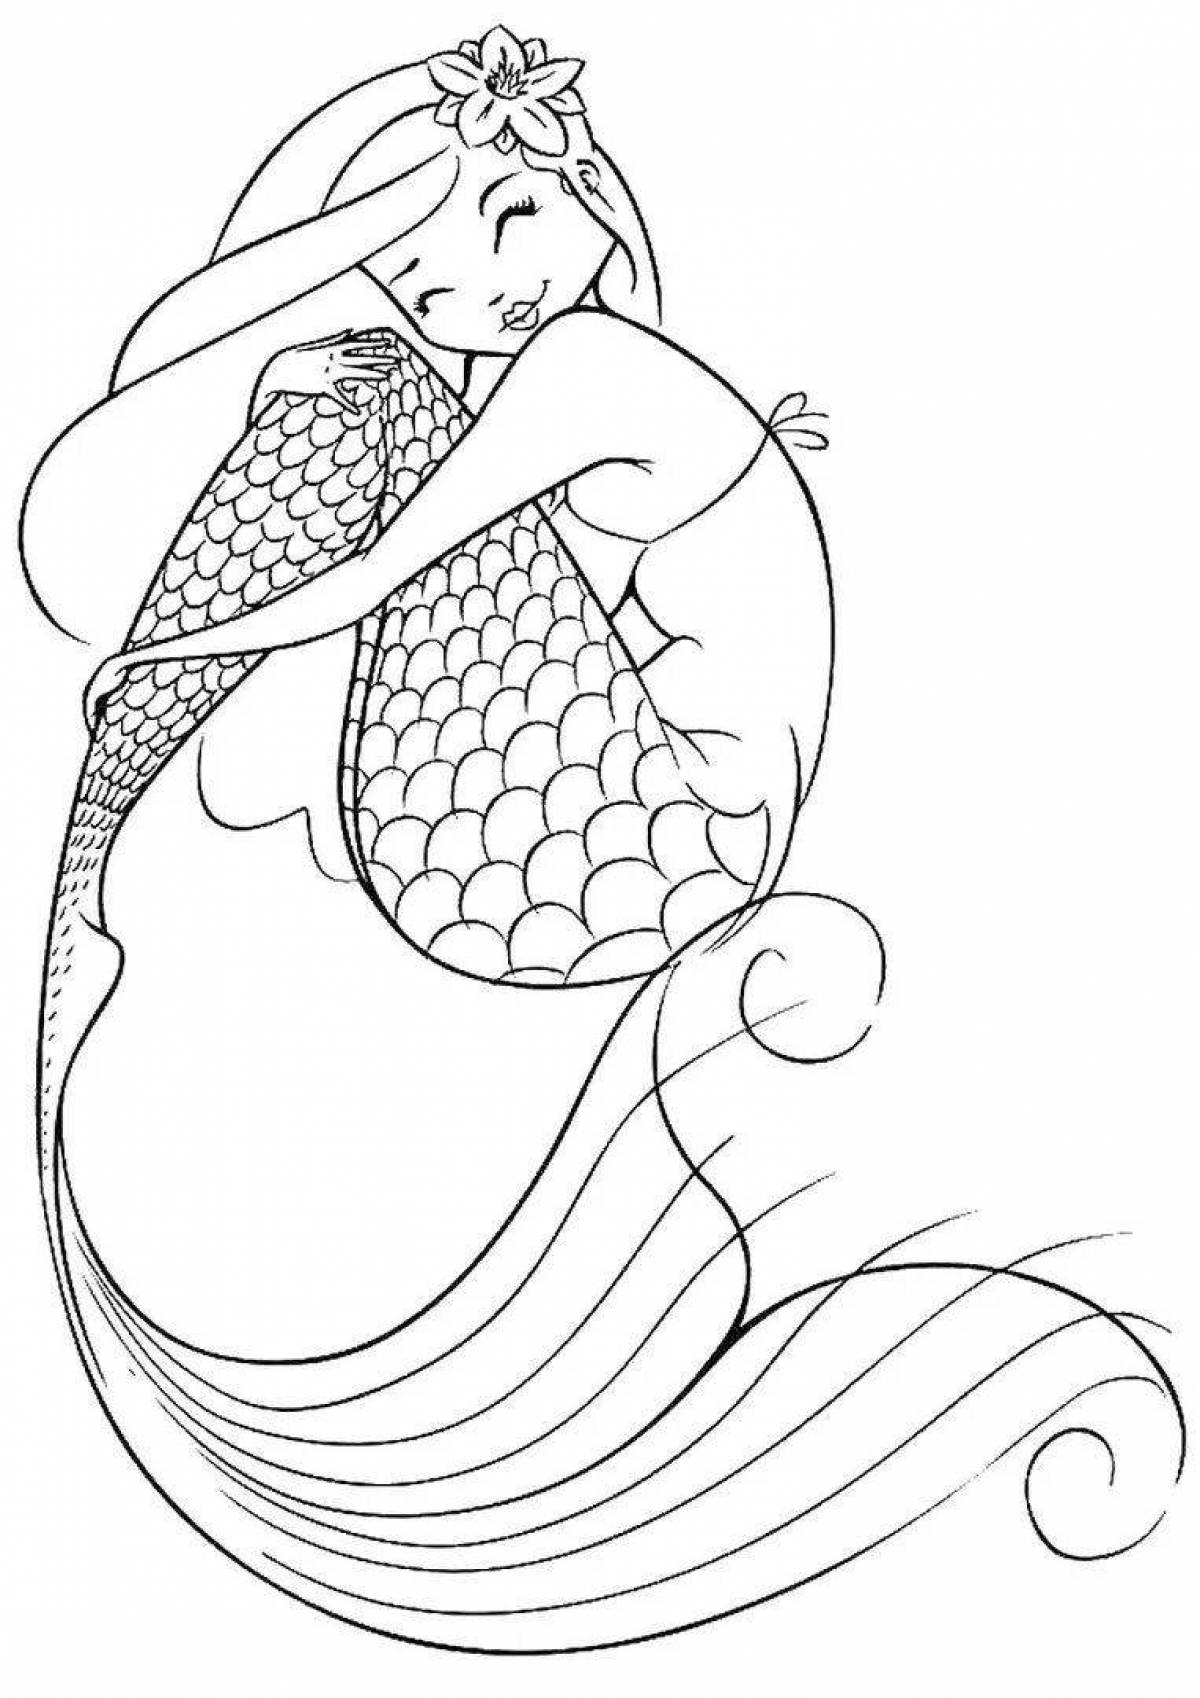 Bright coloring drawing of a mermaid